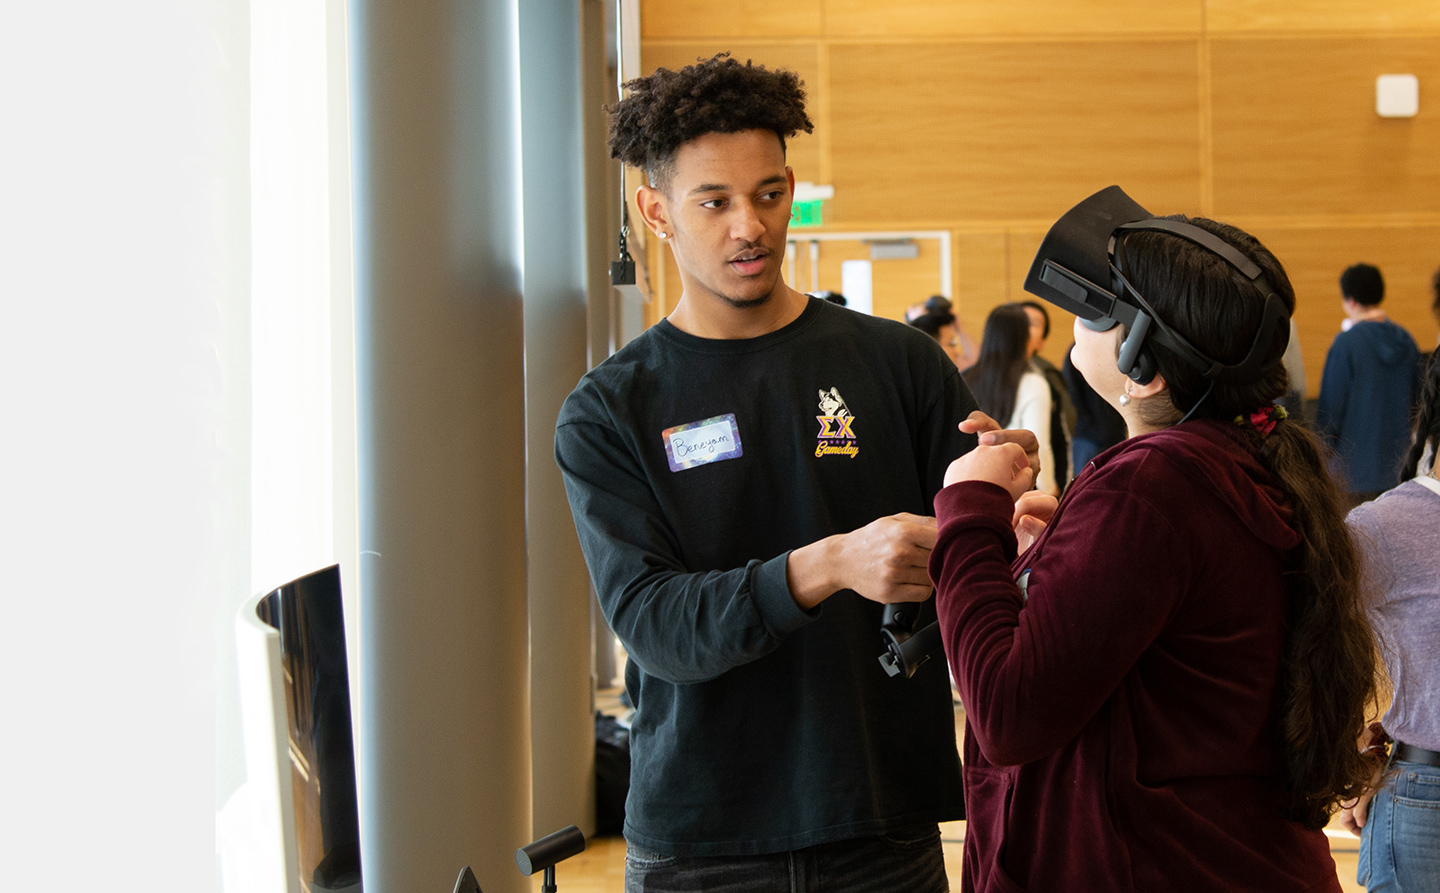 A UW student helps a high school student experiment in VR.